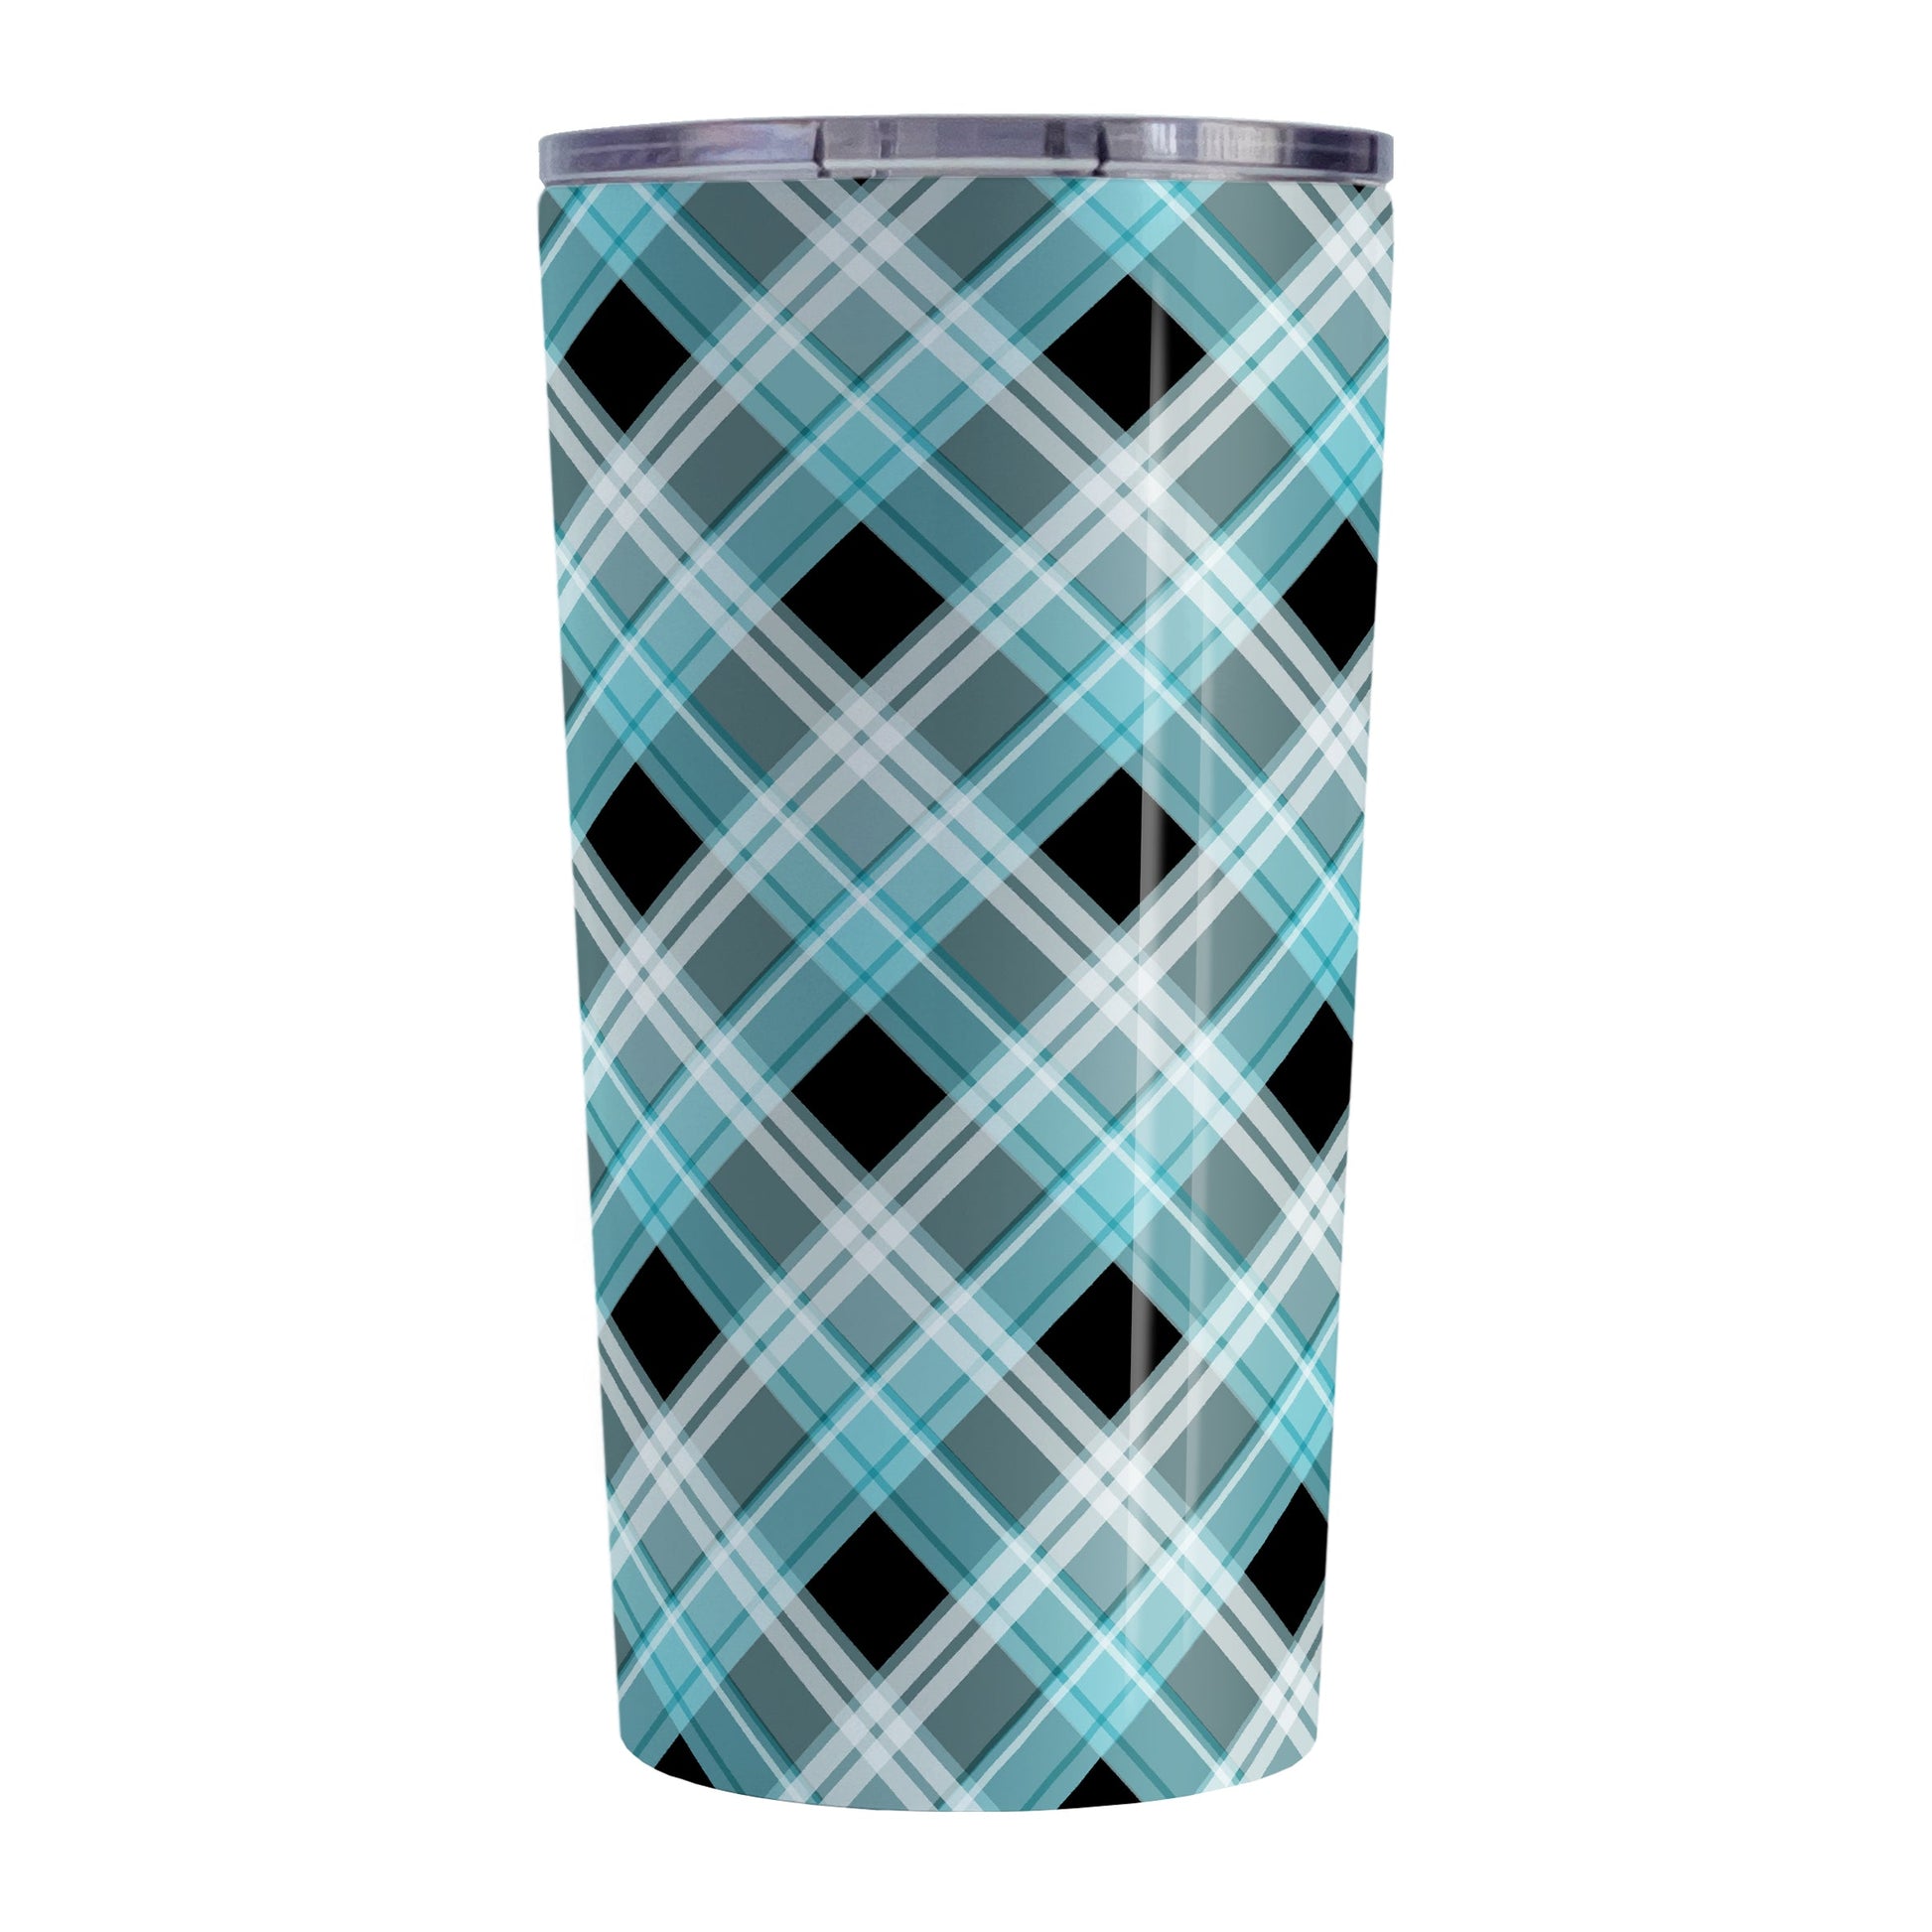 Alternative Black and Turquoise Plaid Tumbler Cup (20oz) at Amy's Coffee Mugs. A stainless steel insulated tumbler cup designed with a diagonal turquoise, black, and white plaid pattern that wraps around the insulated tumbler cup. A heavy-duty tumbler designed for someone who loves plaid patterns and the colors turquoise and black.